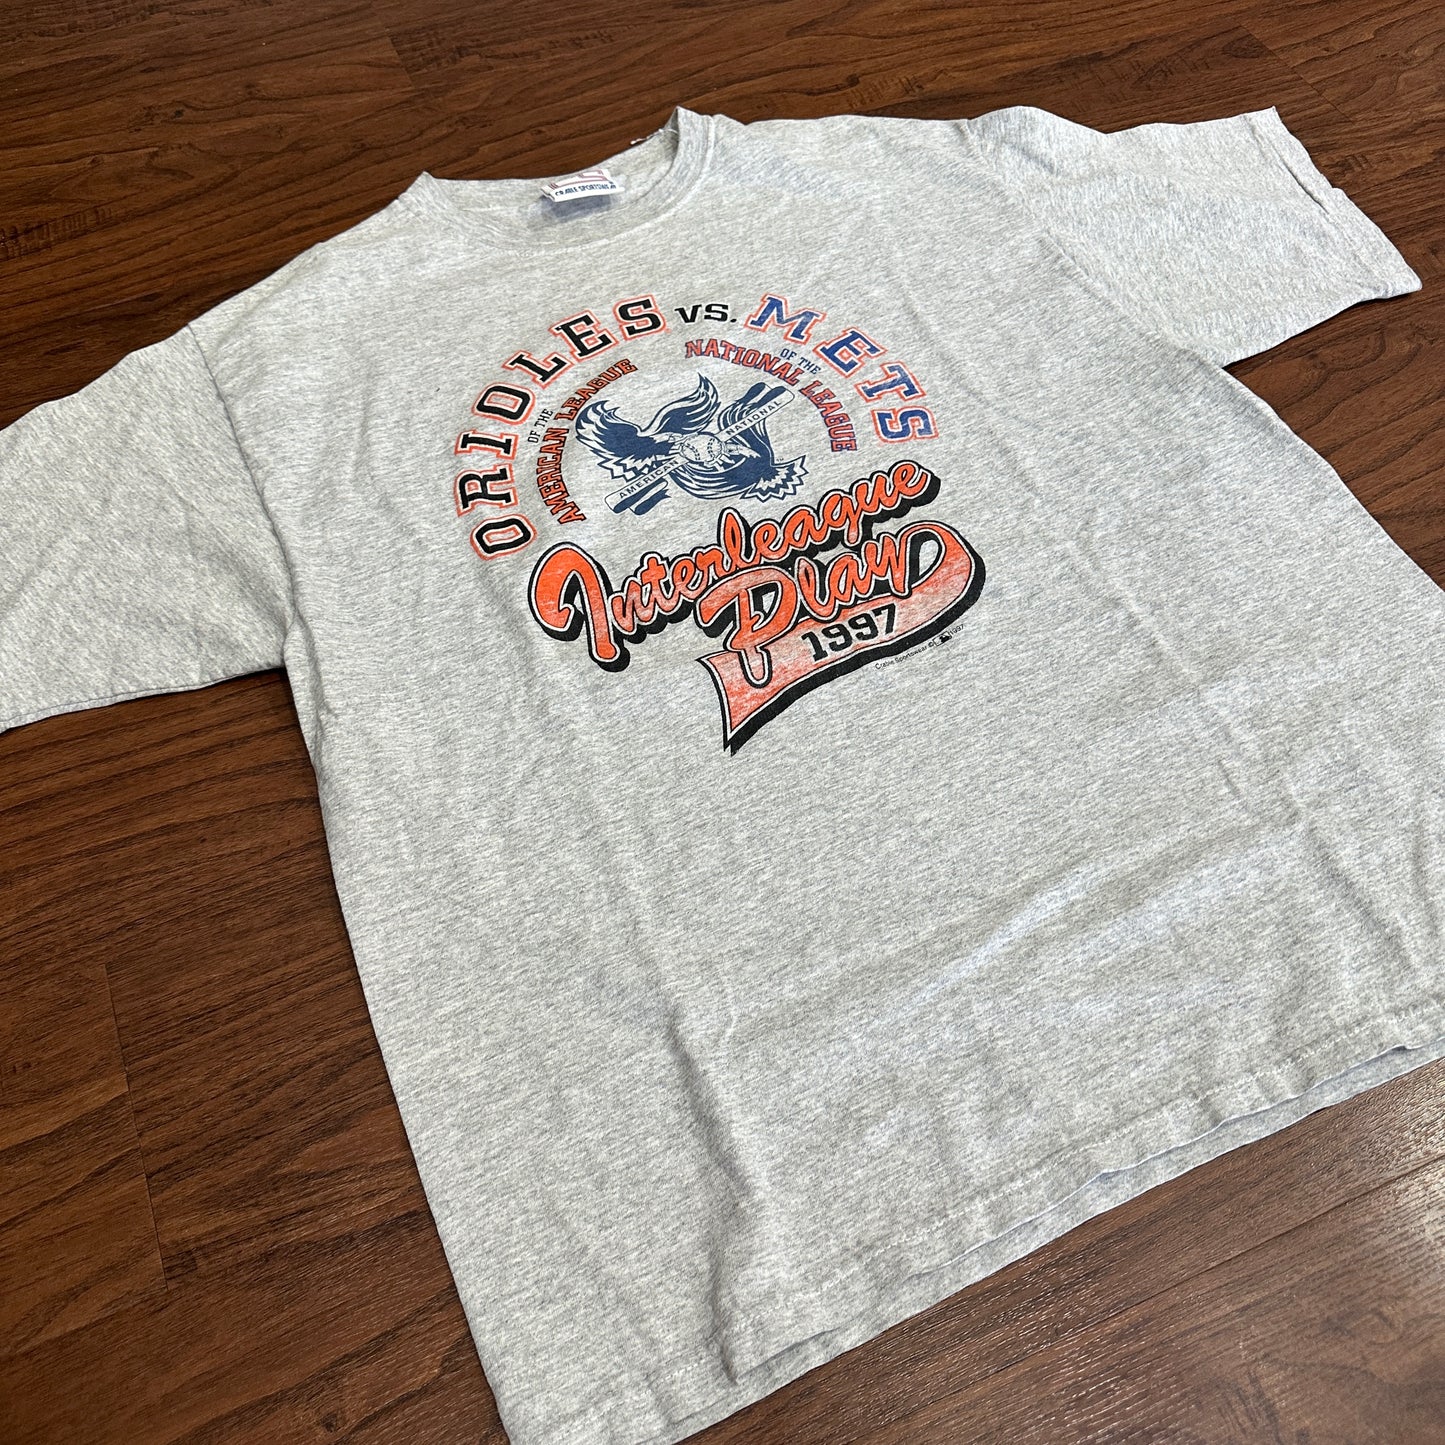 *VINTAGE* Orioles vs Mets league play Graphic Tee (FITS Large/X Large)